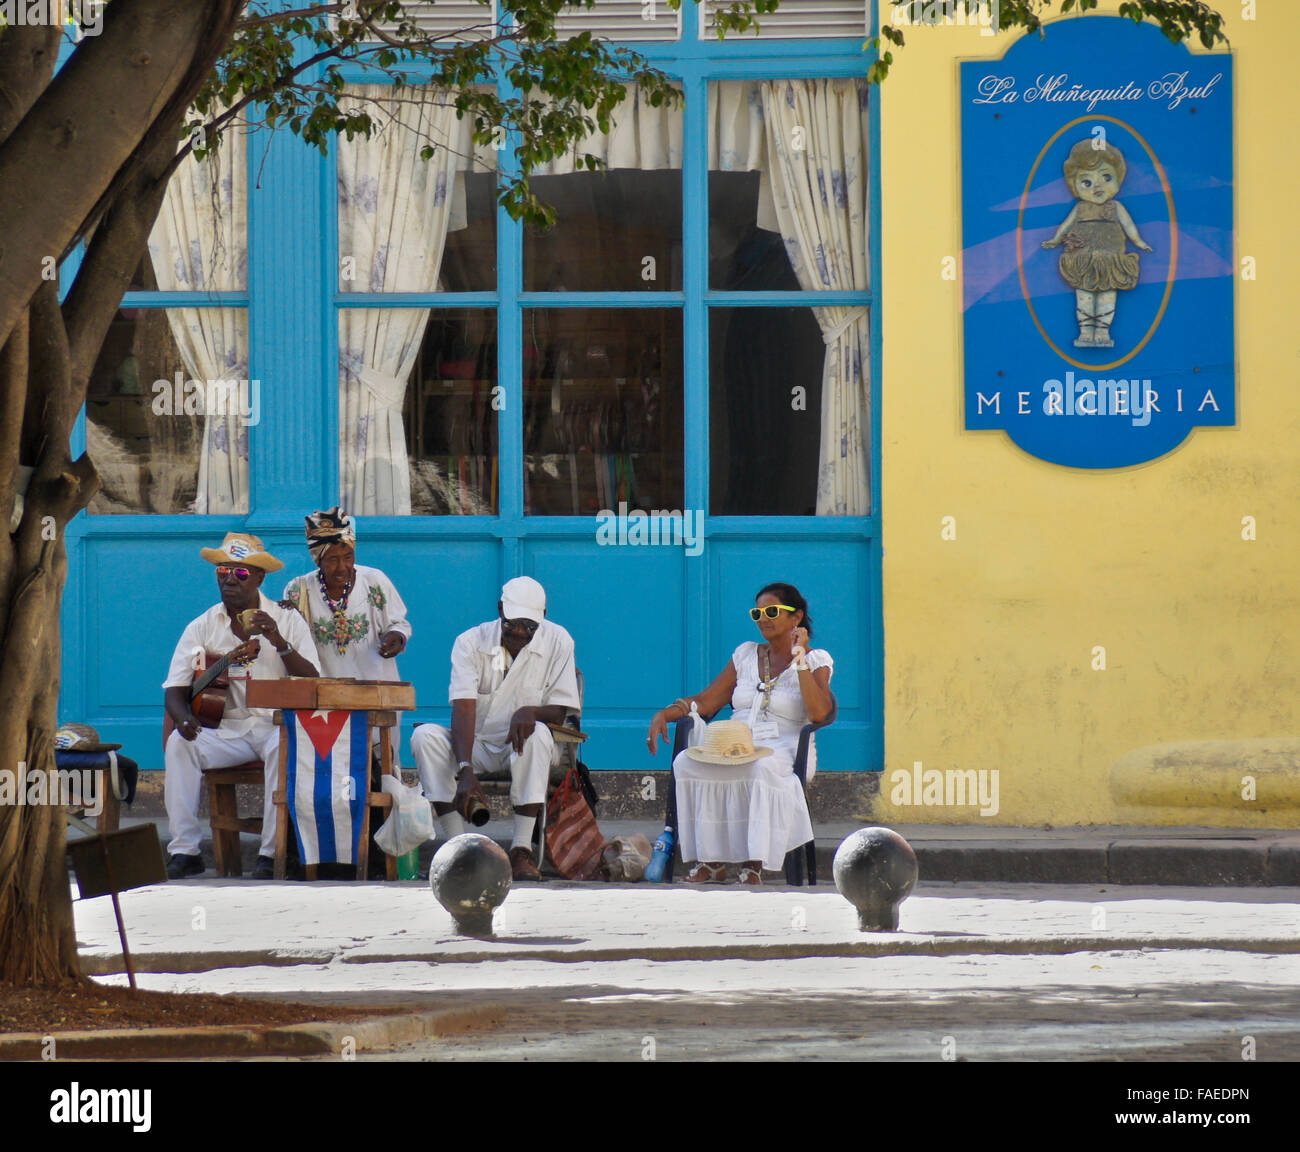 Musical group playing outside a shop in Habana Vieja (Old Havana), Cuba Stock Photo